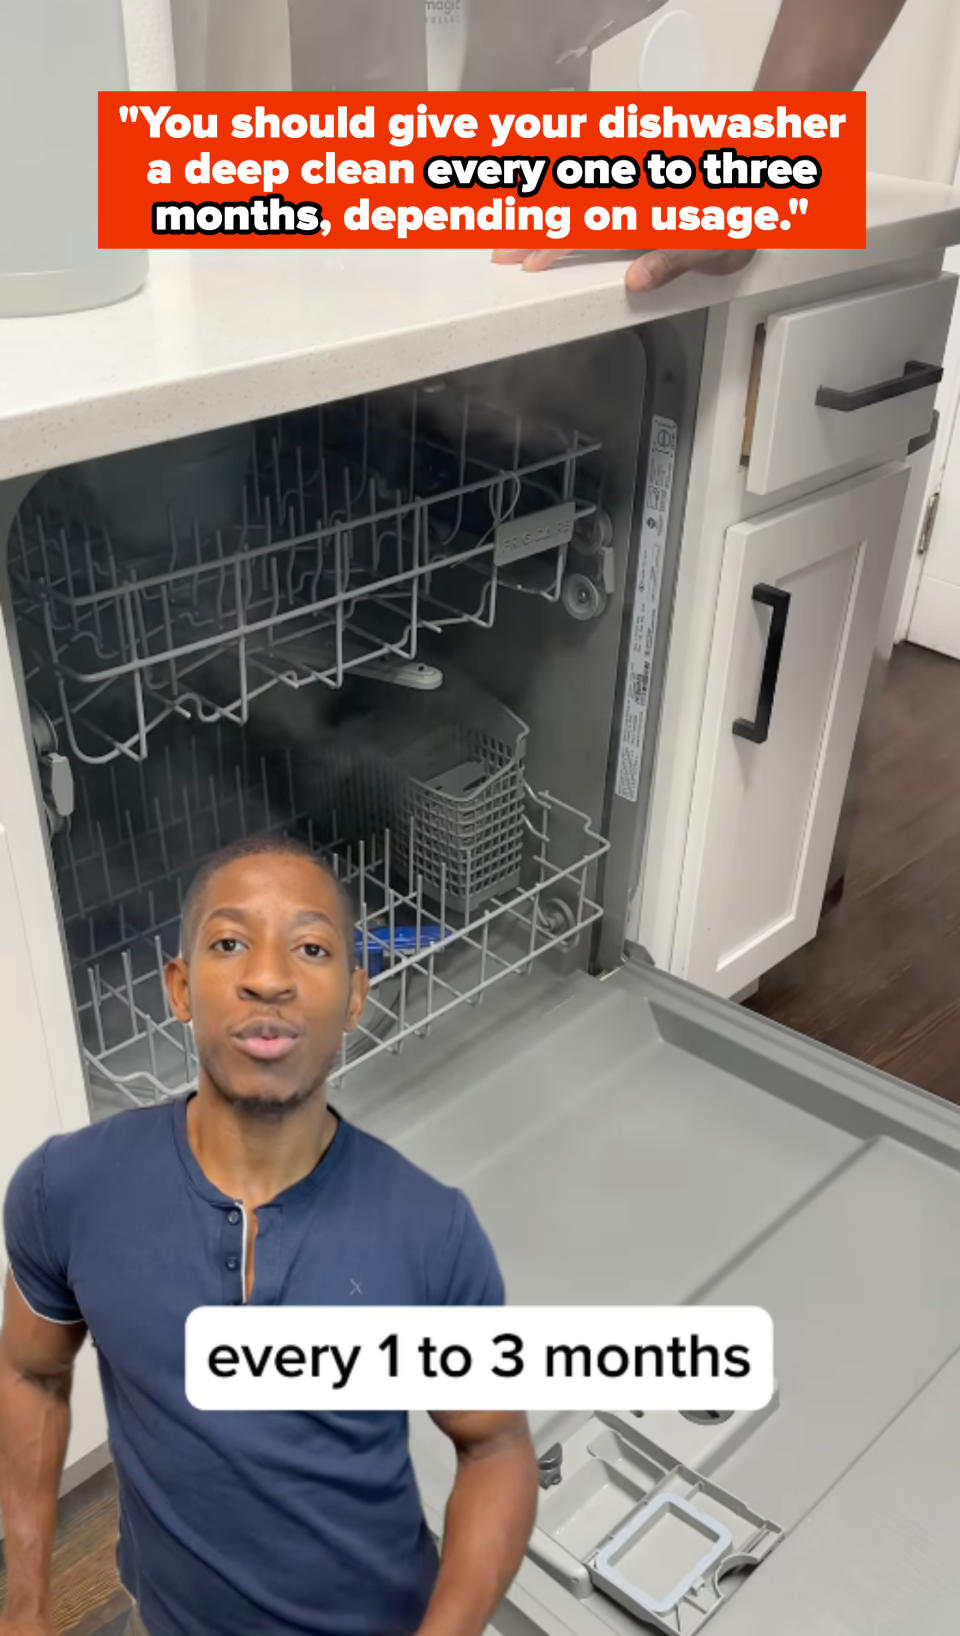 Kyshawn in kitchen standing near open dishwasher, text overlay: "You should give your dishwasher a deep clean every one to three months, depending on usage"